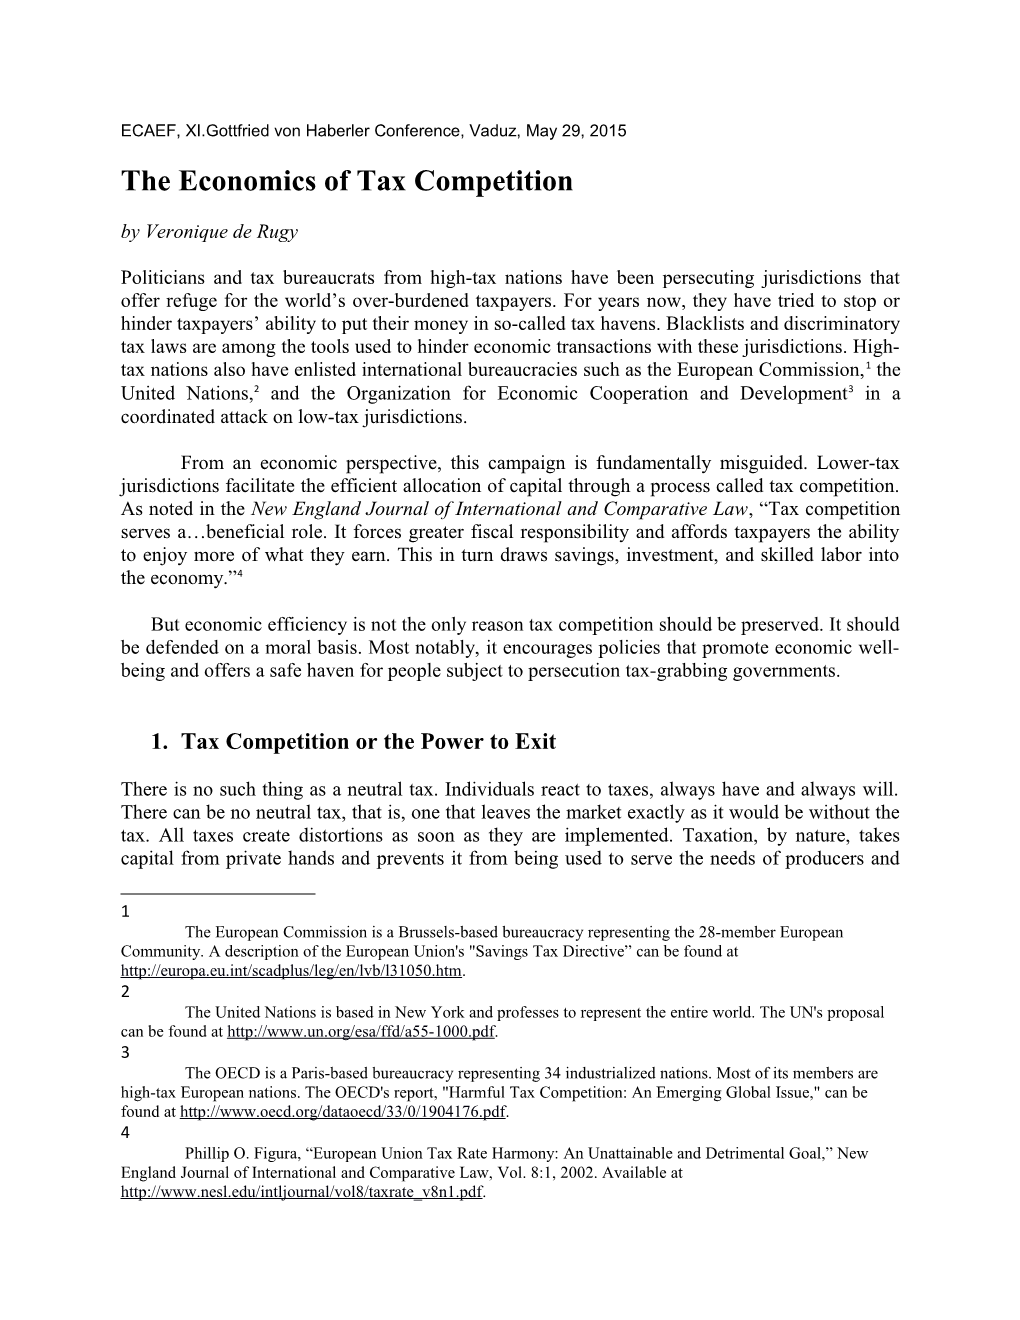 The Economics of Tax Competition